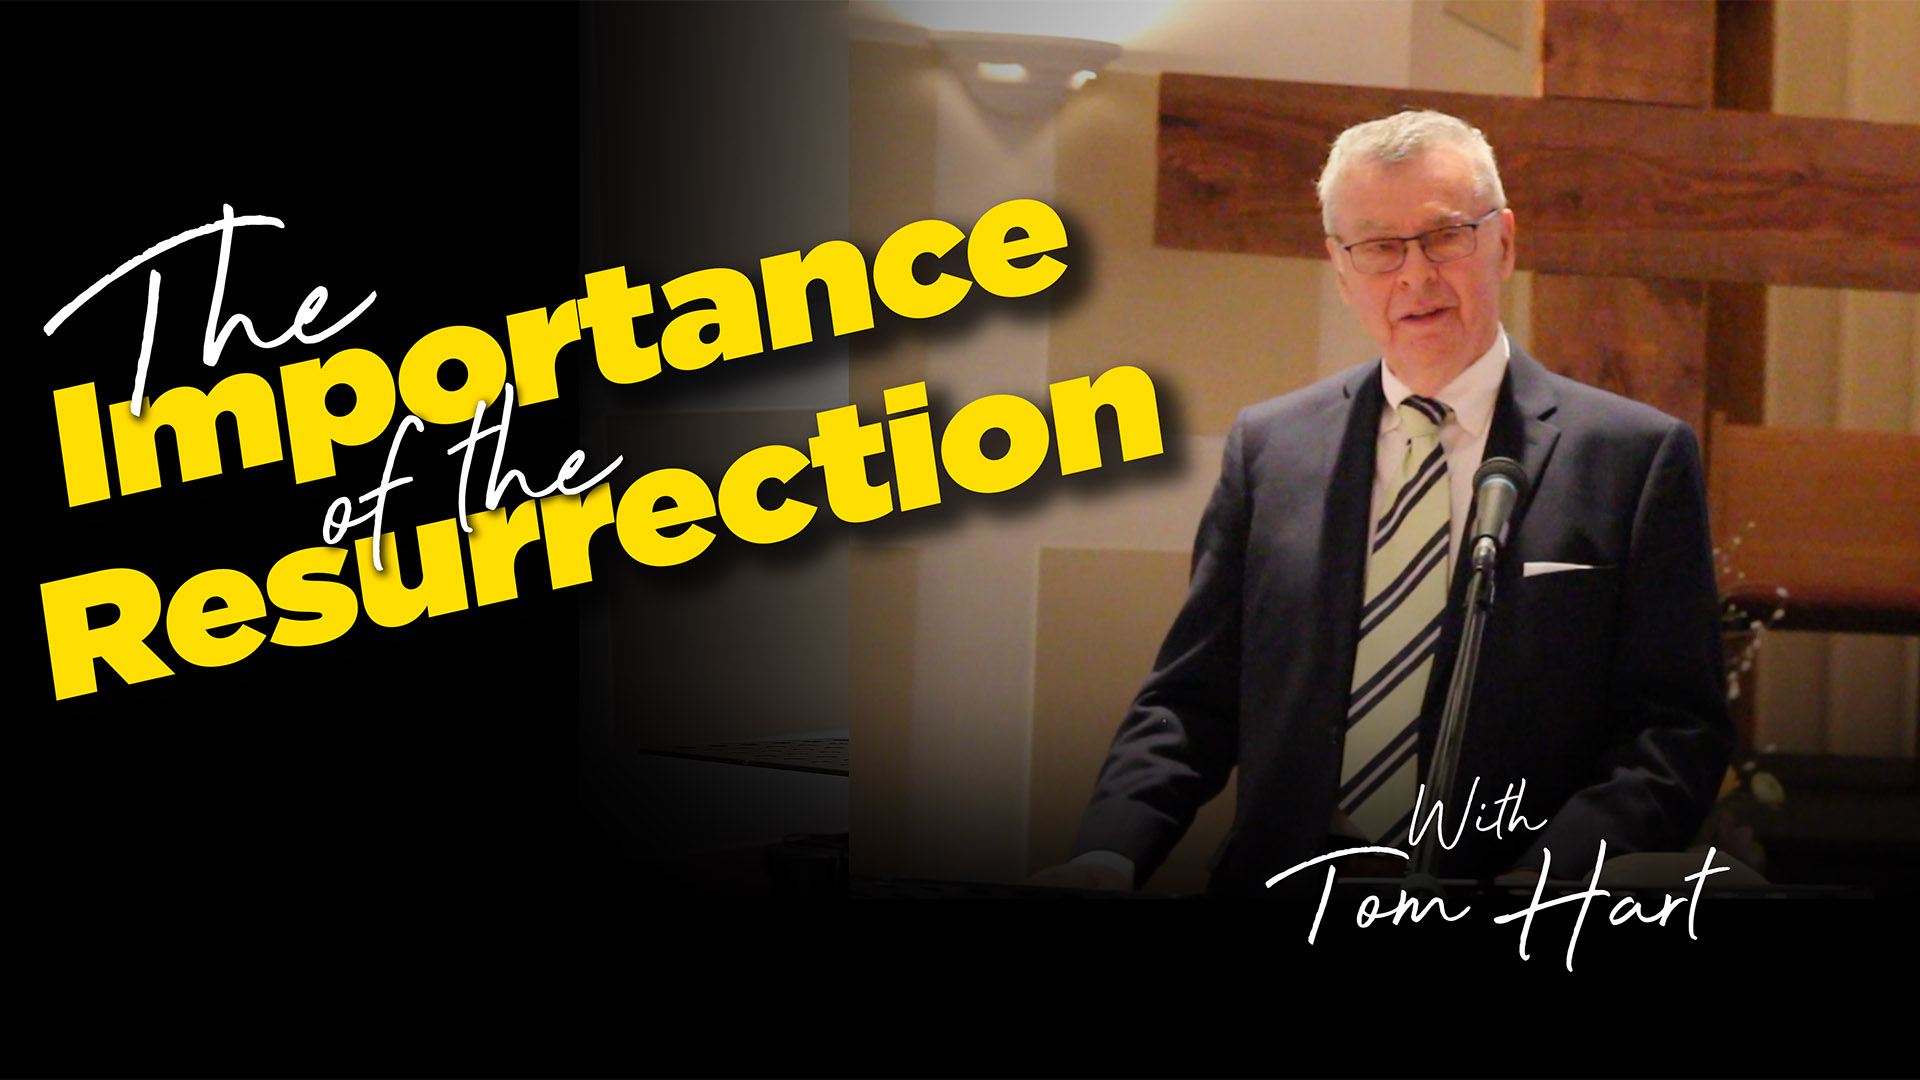 The Importance of the Resurrection with Tom Hart